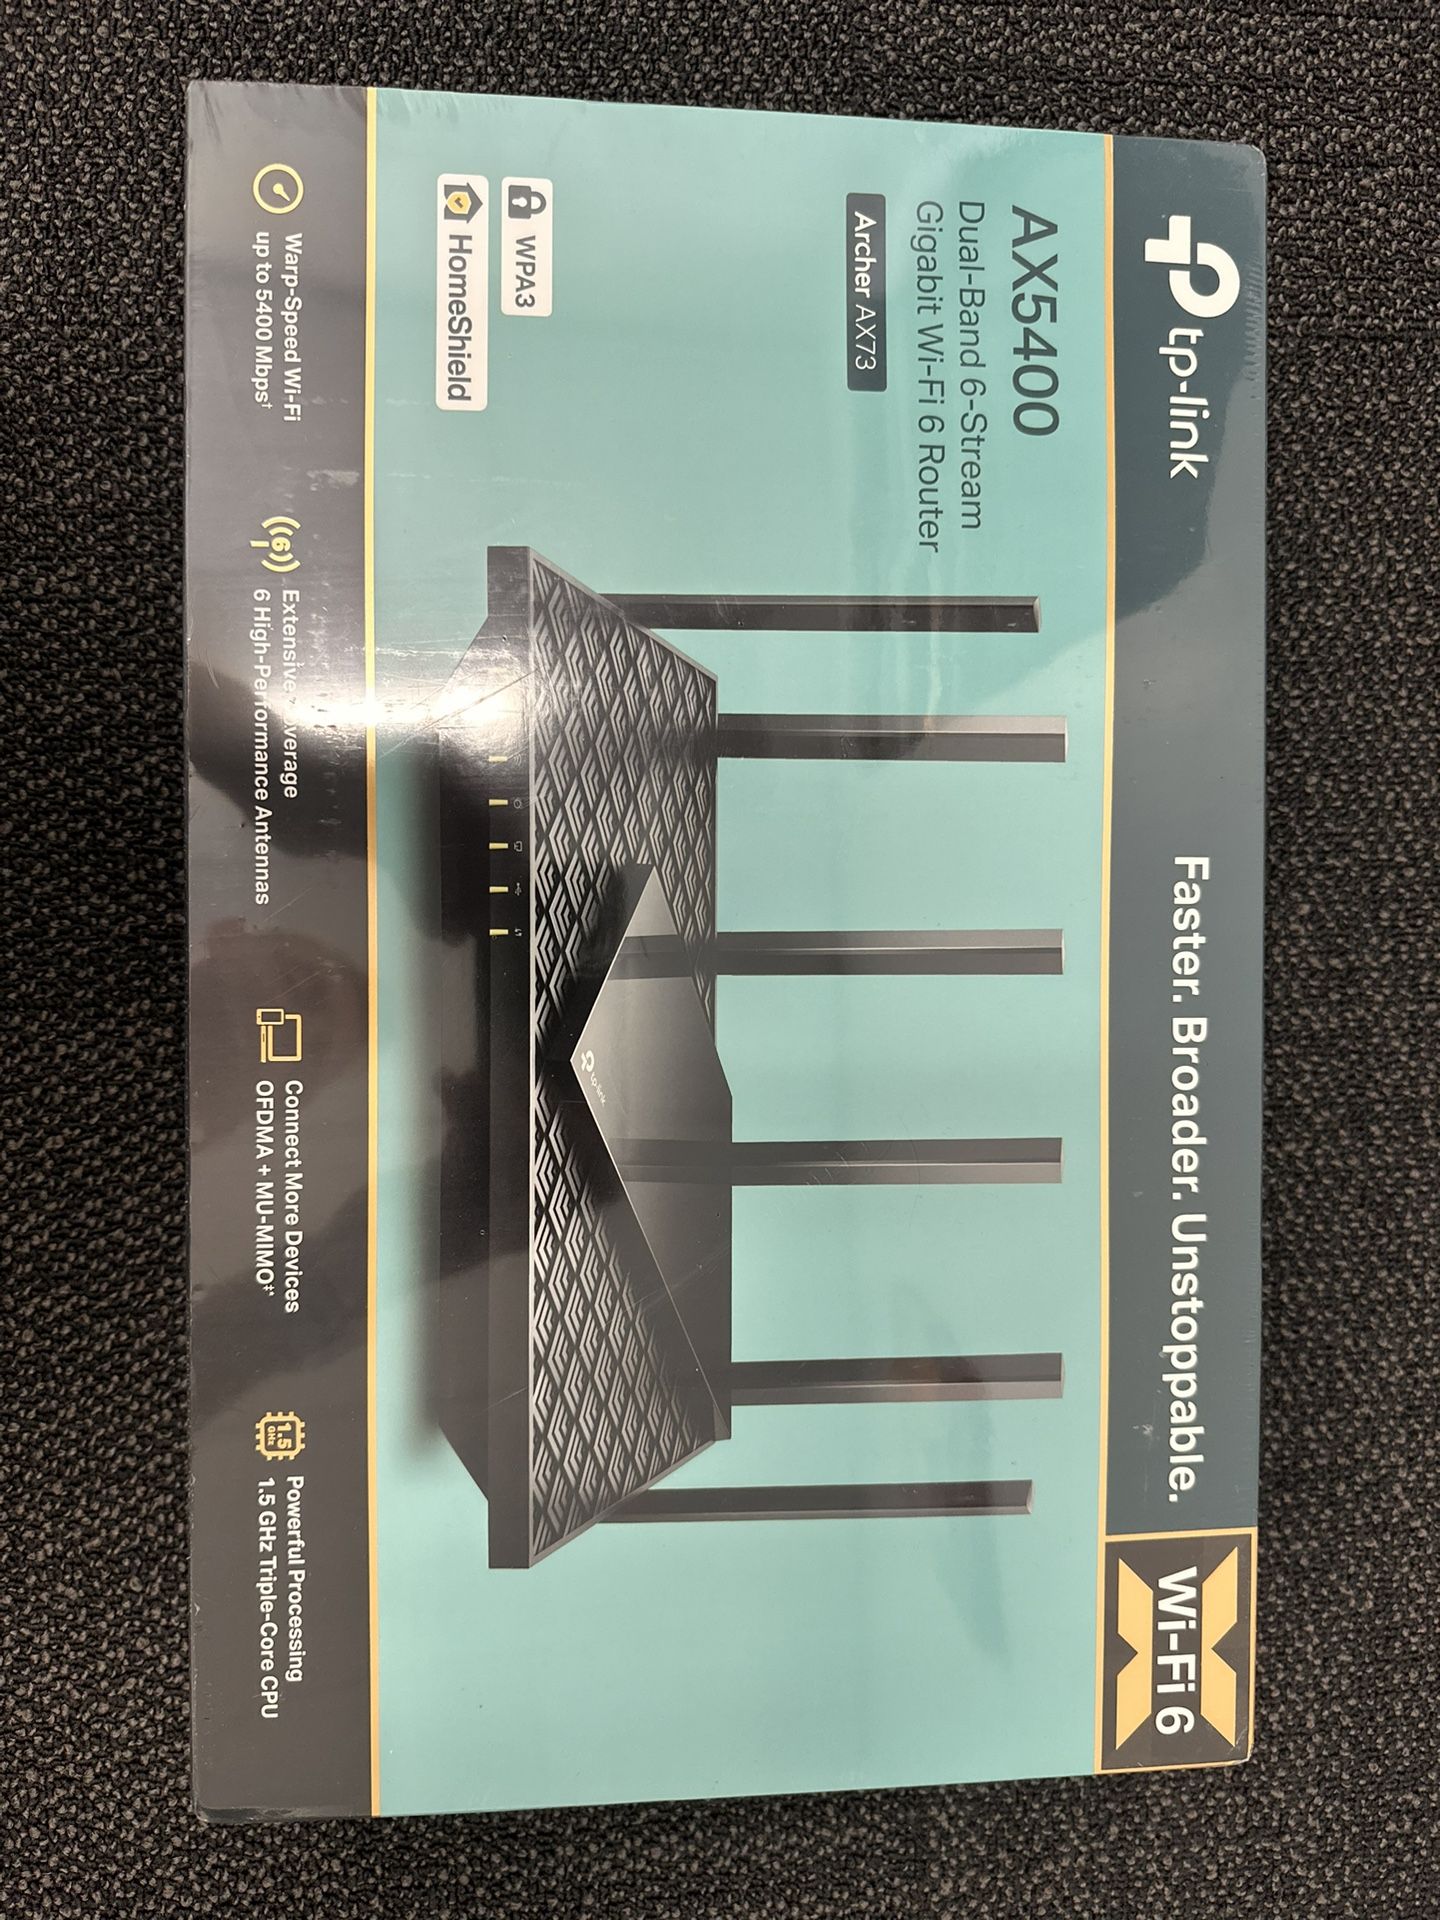 New, Unopened TP-Link AX 5400 Router